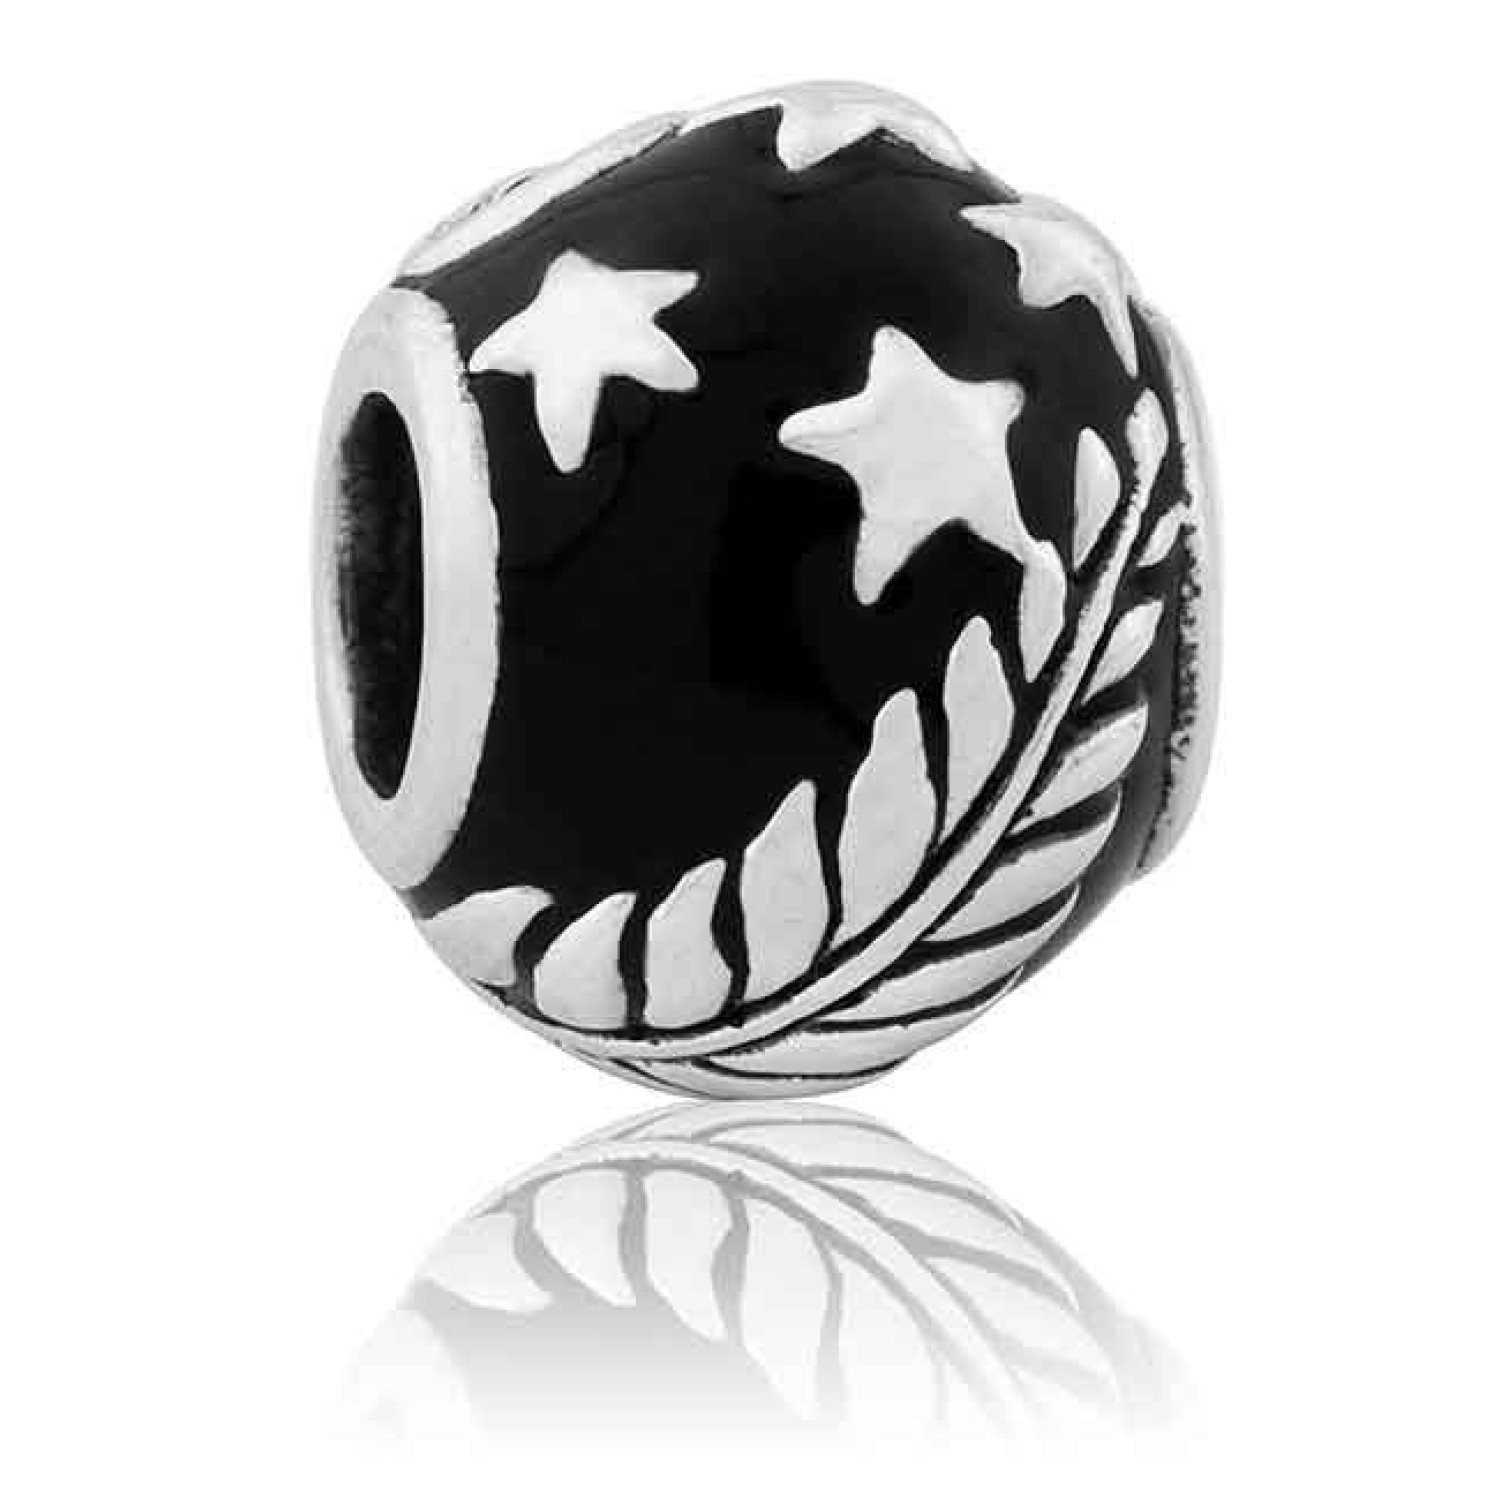 LKE025 Evolve NZ Pride (Mana). A symbol of New Zealand, the silver fern evokes a sense of mana, passion and pride. This striking black enamel charm features our treasured silver fern and New Zealand’s guiding light, the Southern Cross. These four star @ch